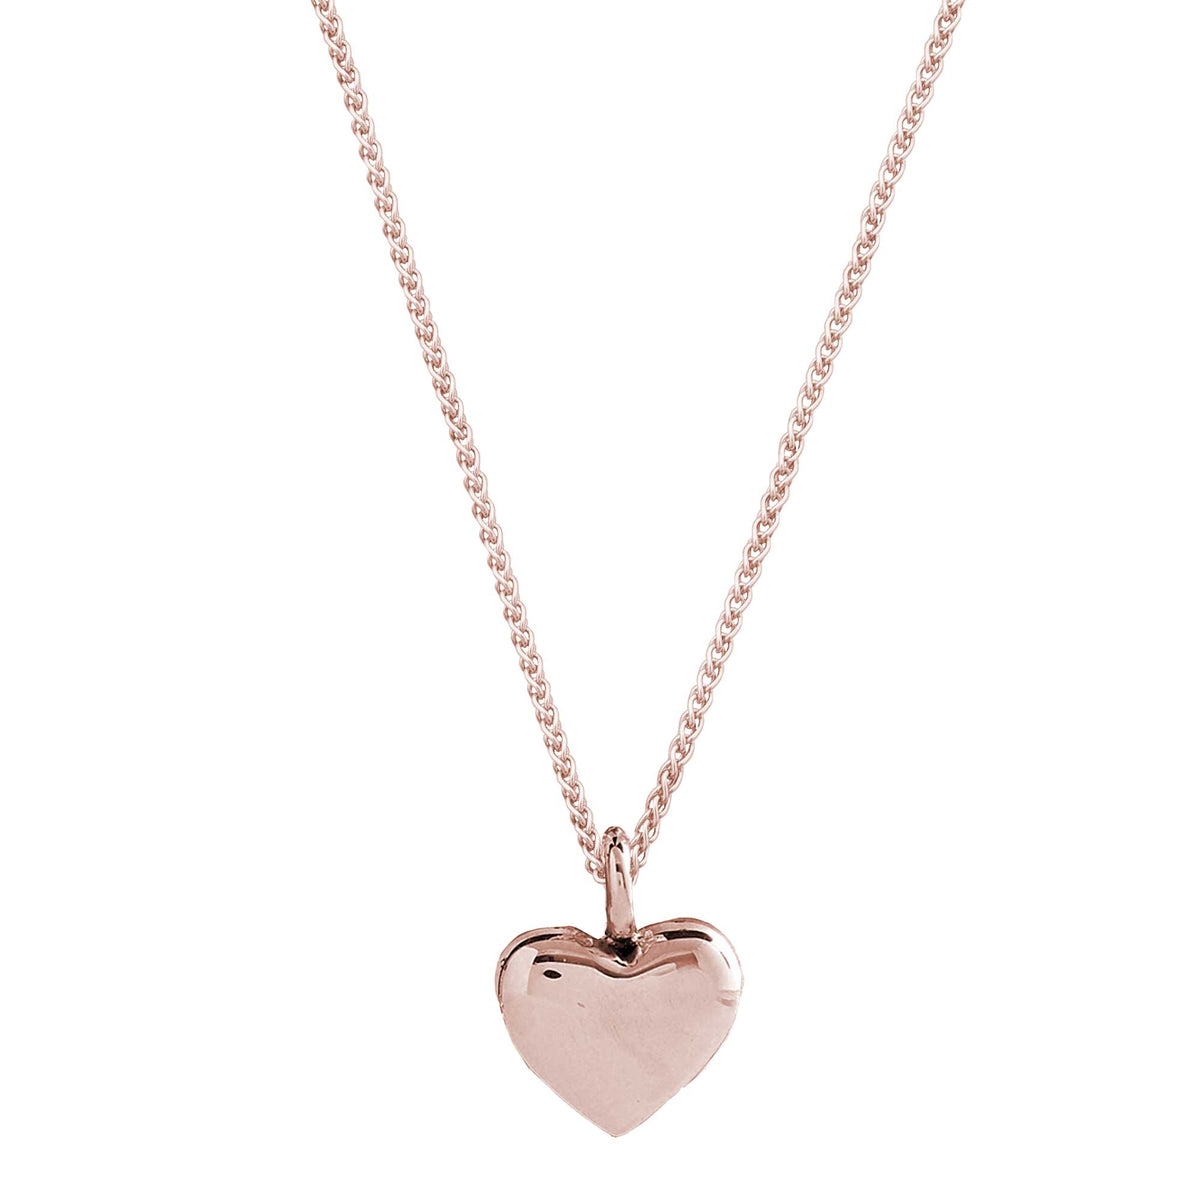 solid rose gold heart pendant necklace for women christmas gift for her Scarlett Jewellery